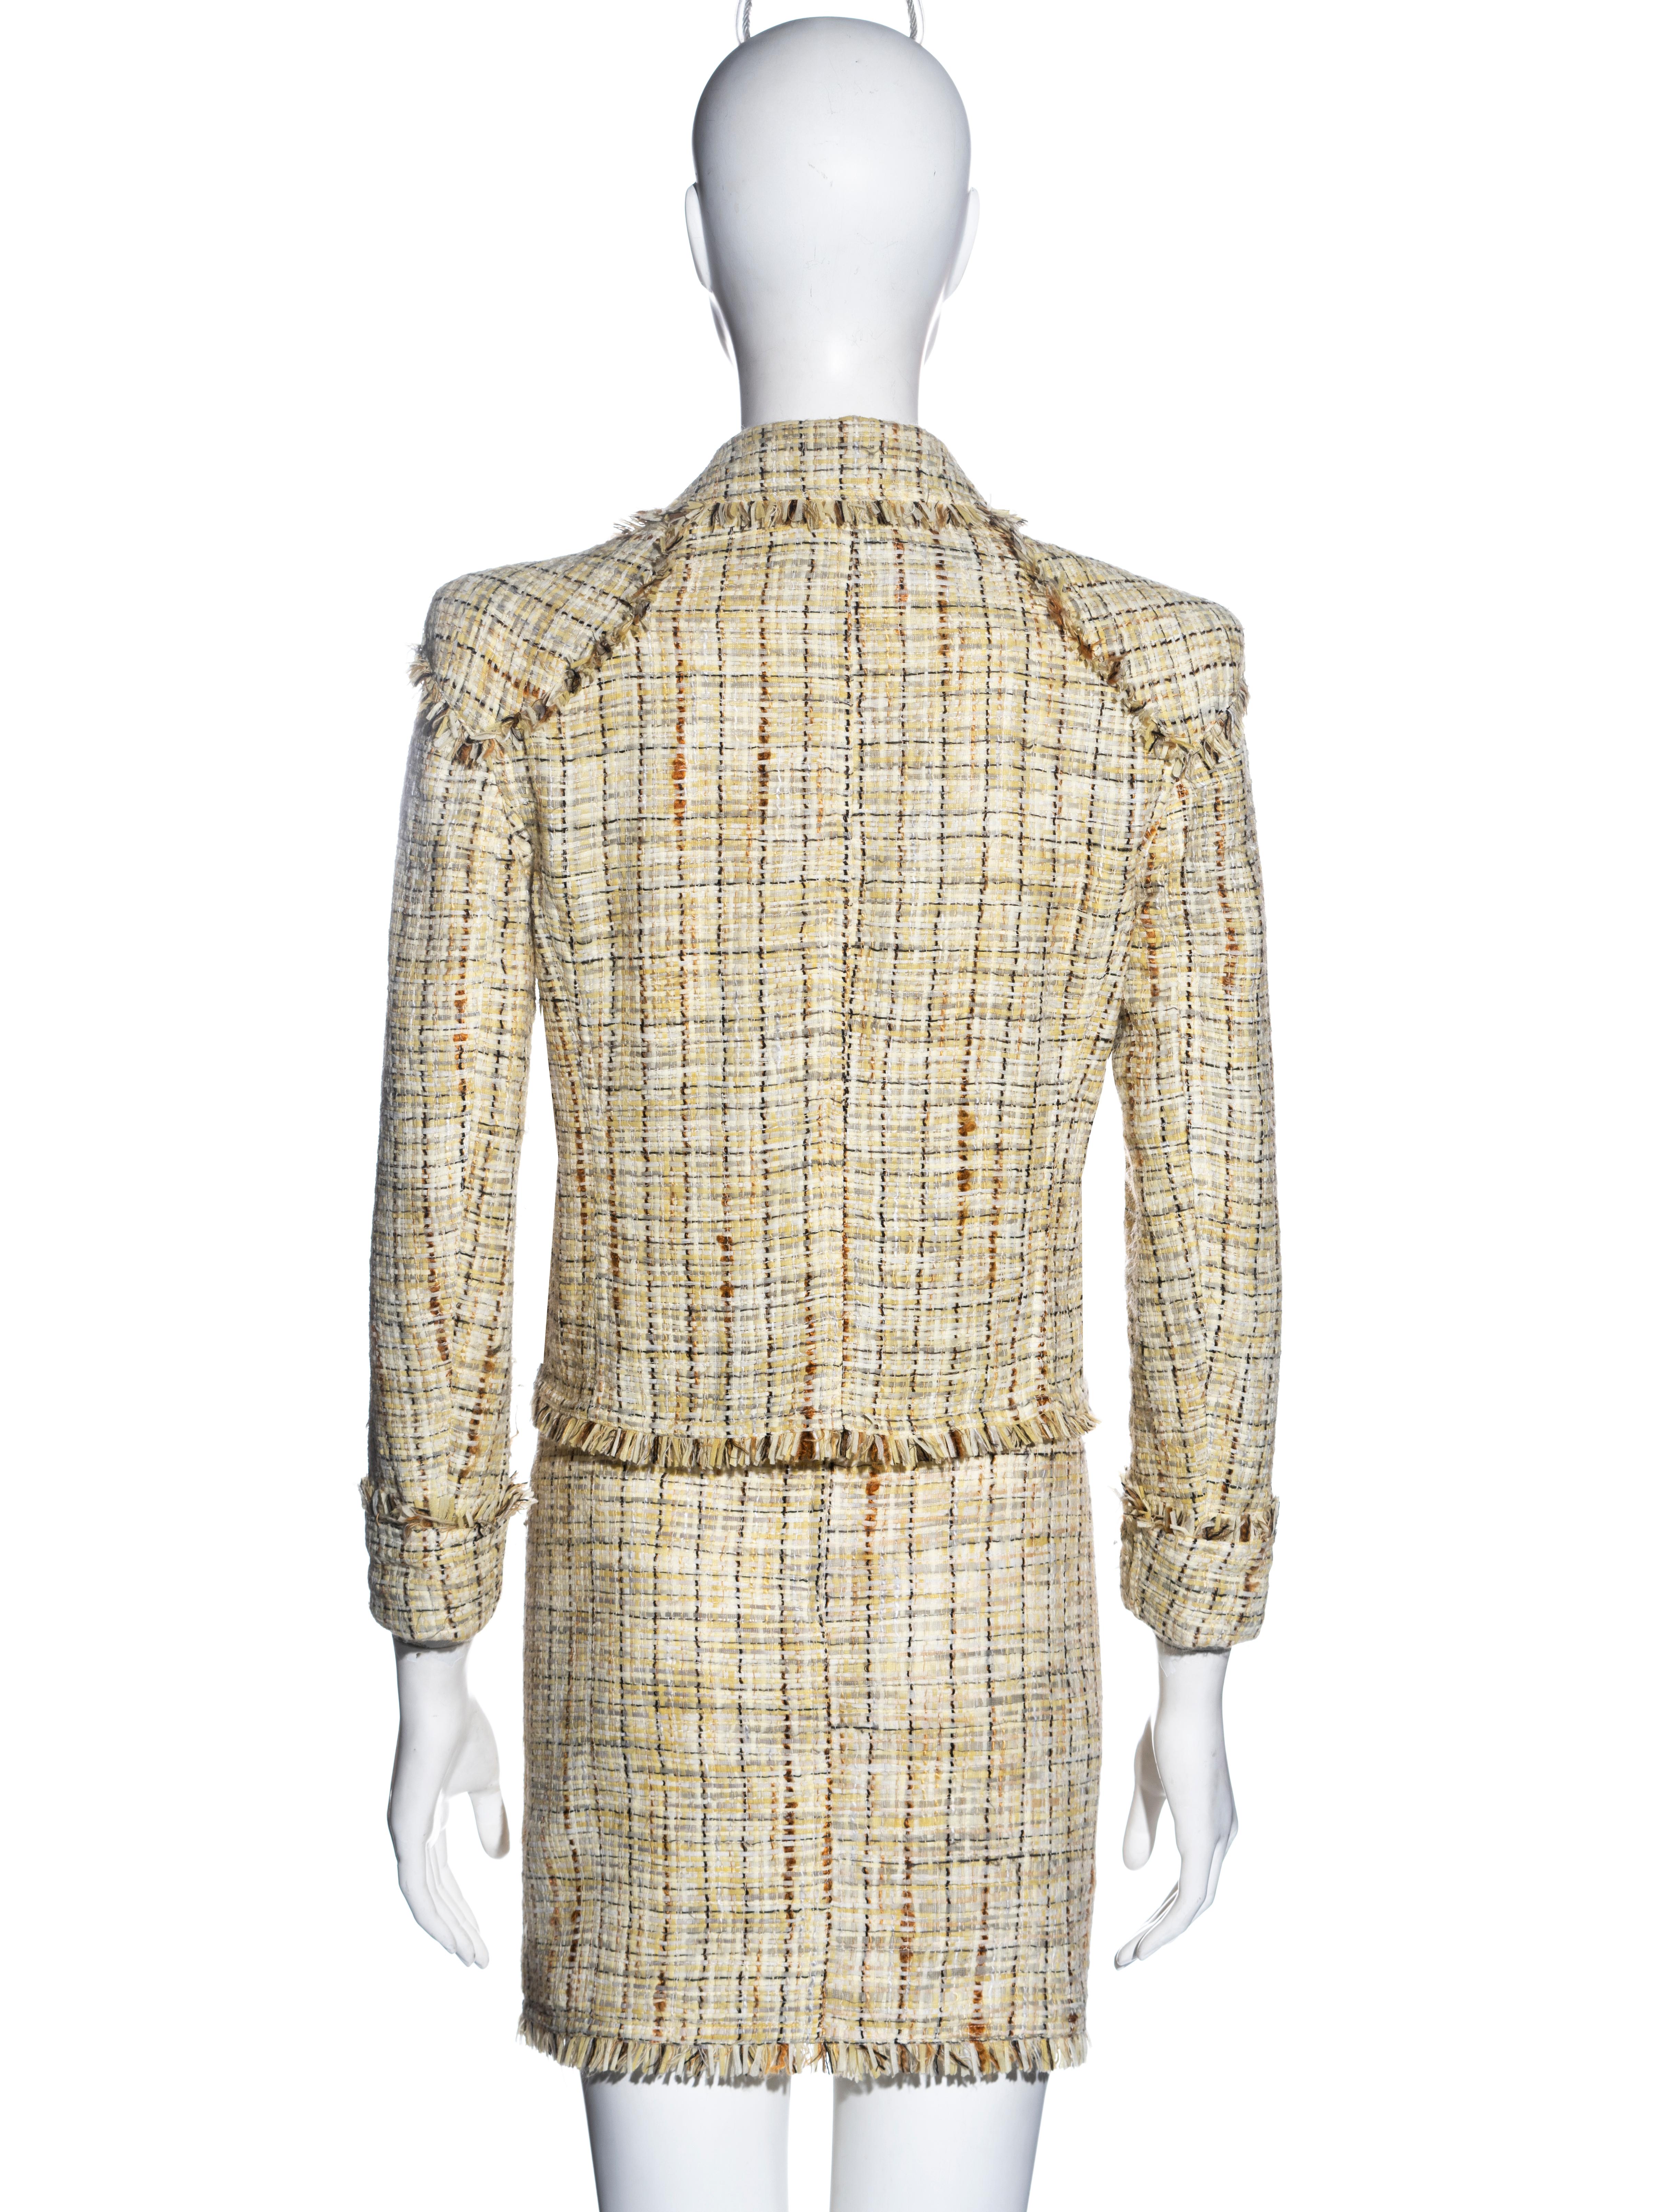 Chanel by Karl Lagerfeld yellow tweed jacket and skirt suit, ss 1998 For Sale 2